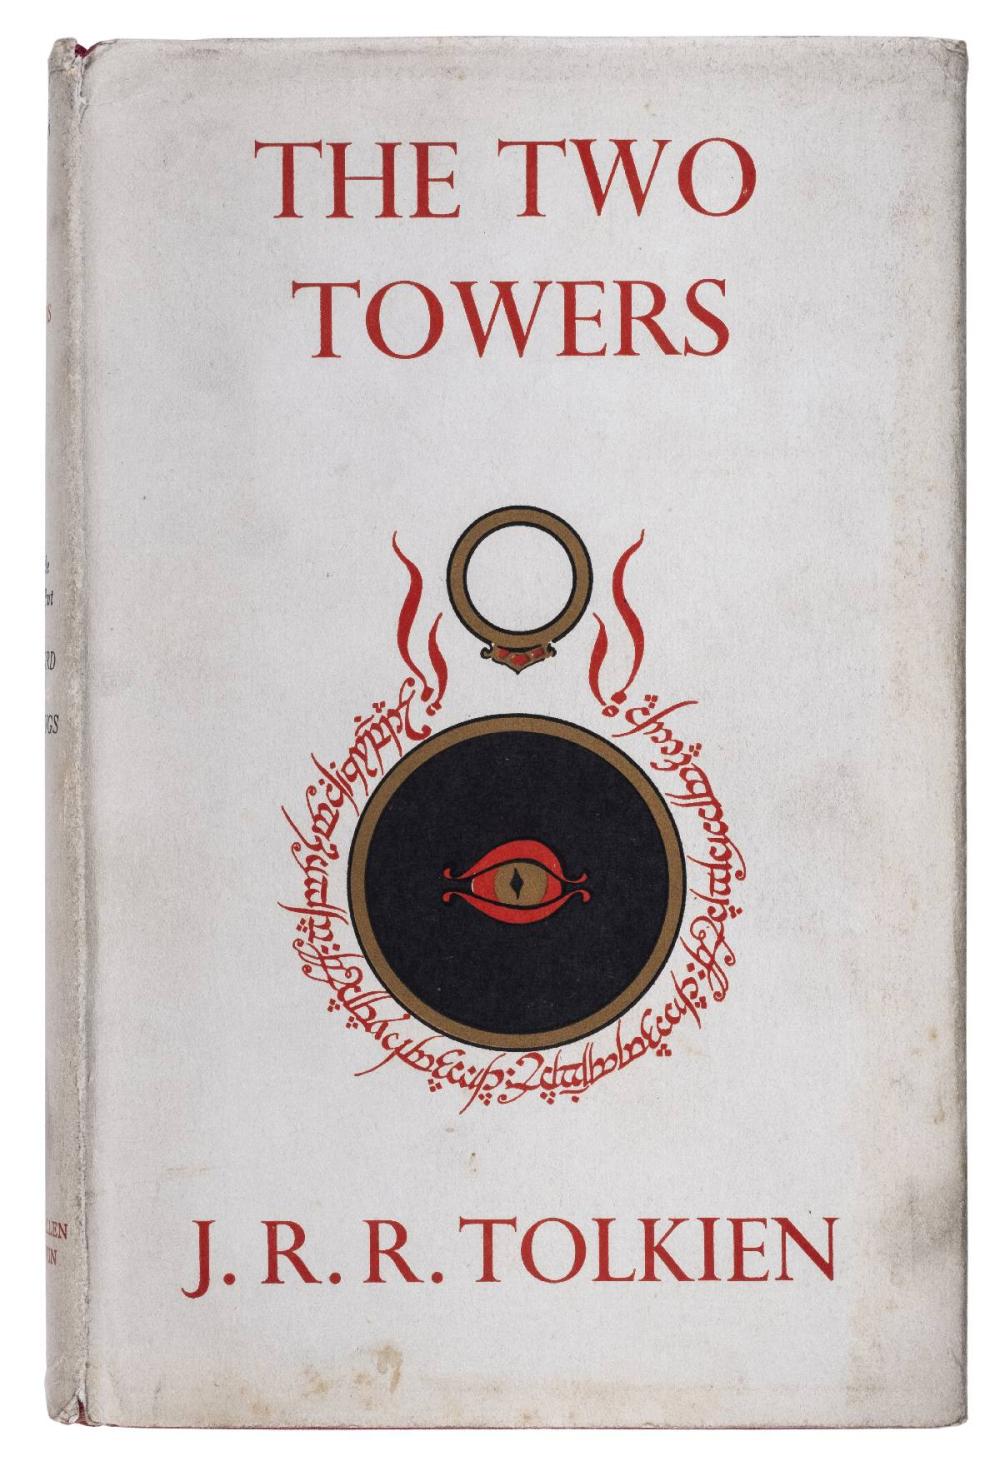 lord of the rings the two towers